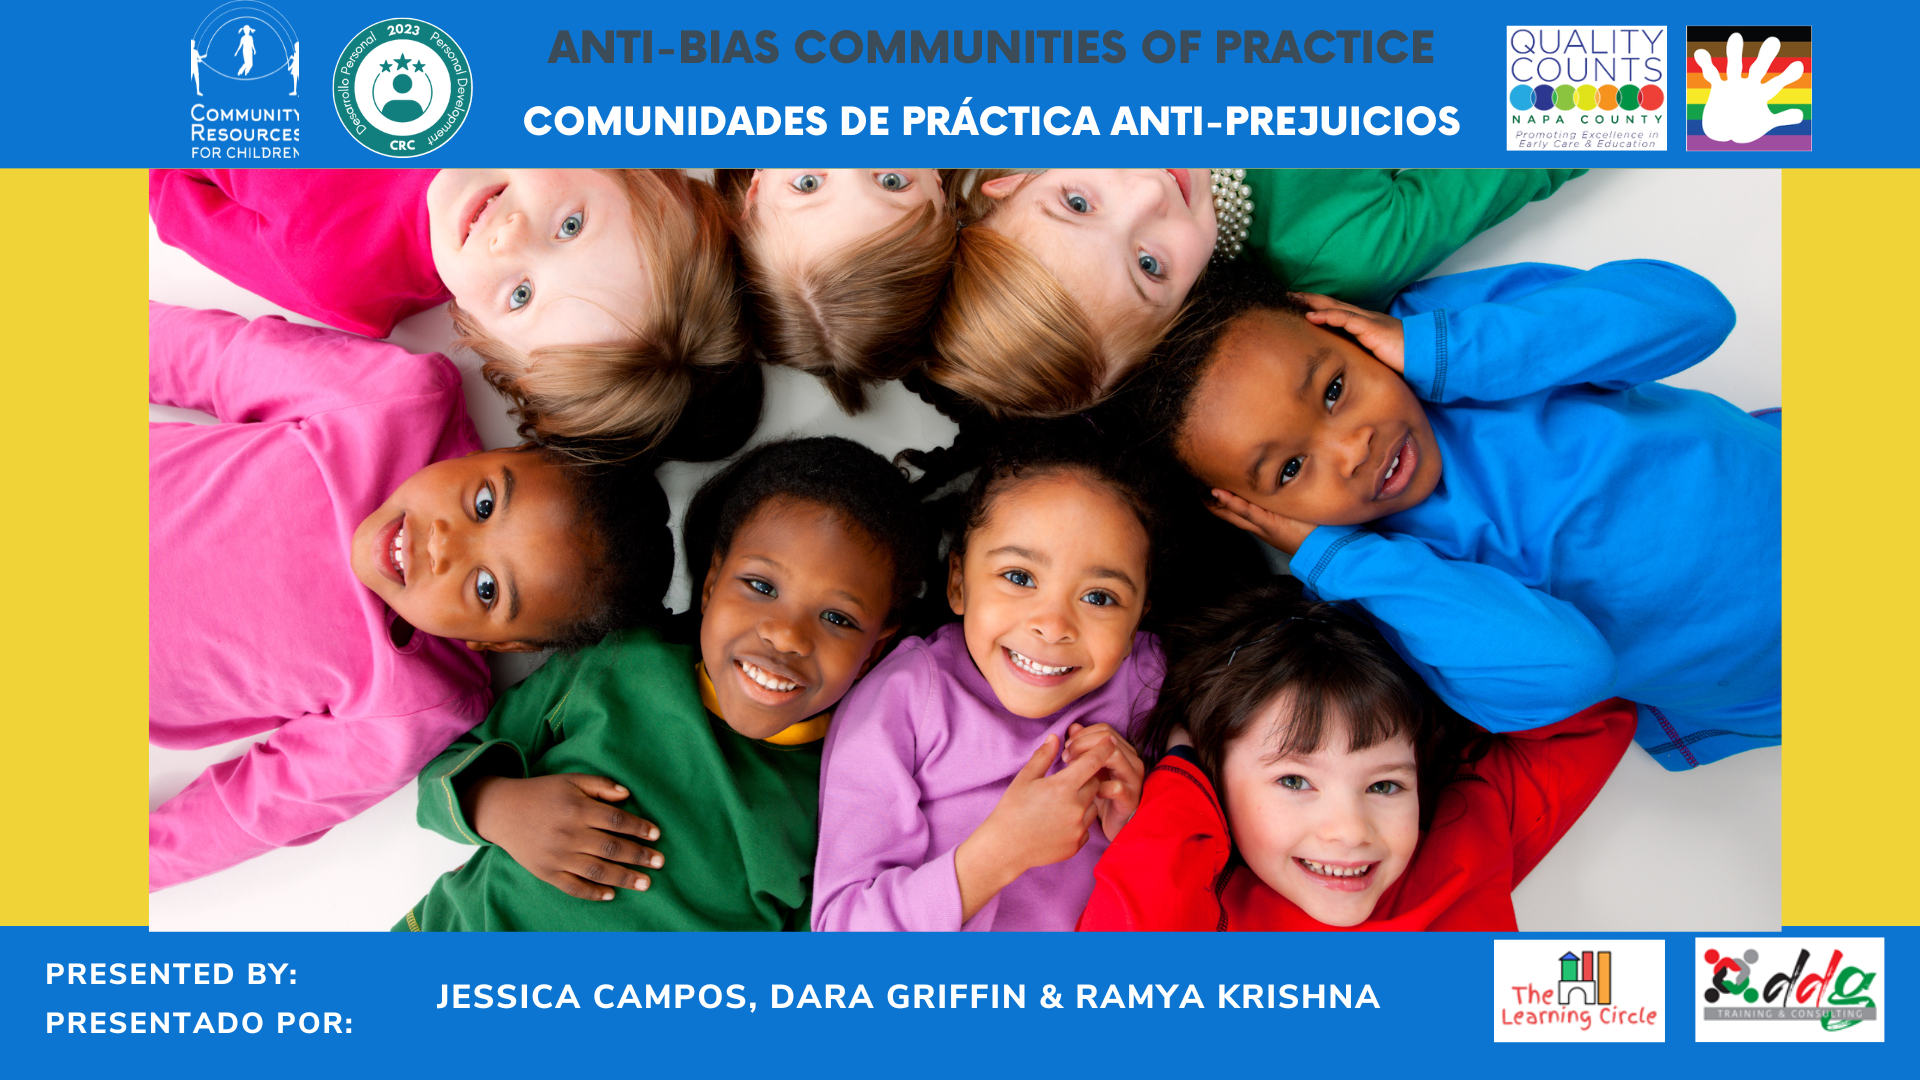 This image is presenting a community of practice that is focused on promoting personal development for children through quality care and education, presented by Jessica Campos, Dara Griffin, and Ramya Krishna. Full Text: 20,23 Personal ANTI-BIAS COMMUNITIES OF PRACTICE QUALITY COUNTS COMMUNITY COMUNIDADES DE PRÁCTICA ANTI-PREJUICIOS NAPA UNTY RESOURCES Promotin Desarrollo Persona! FOR CHILDREN CRC Farle Care & Education PRESENTED BY: odda Then PRESENTADO POR: JESSICA CAMPOS, DARA GRIFFIN & RAMYA KRISHNA Learning Circle